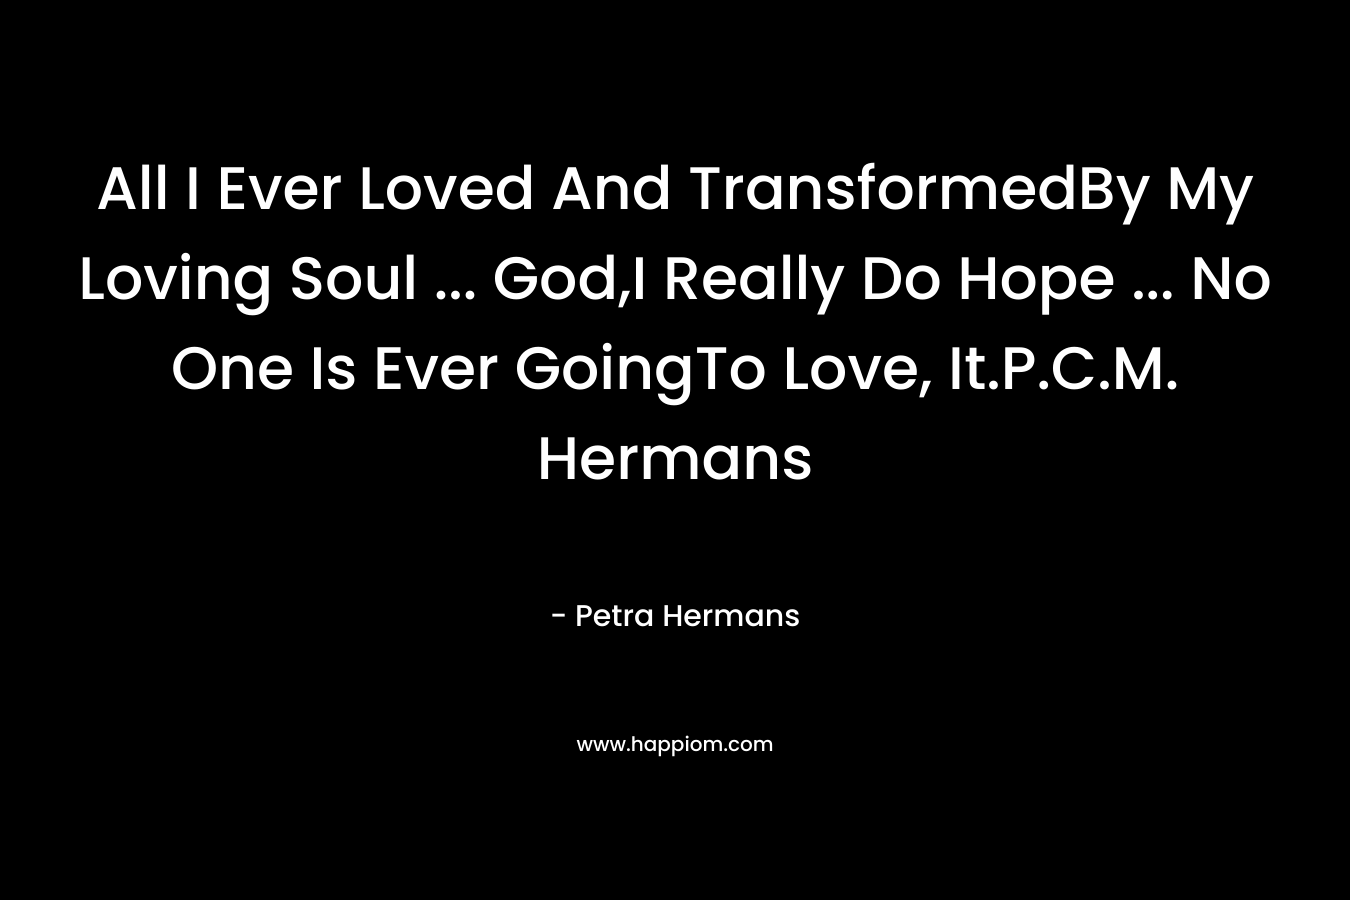 All I Ever Loved And TransformedBy My Loving Soul ... God,I Really Do Hope ... No One Is Ever GoingTo Love, It.P.C.M. Hermans